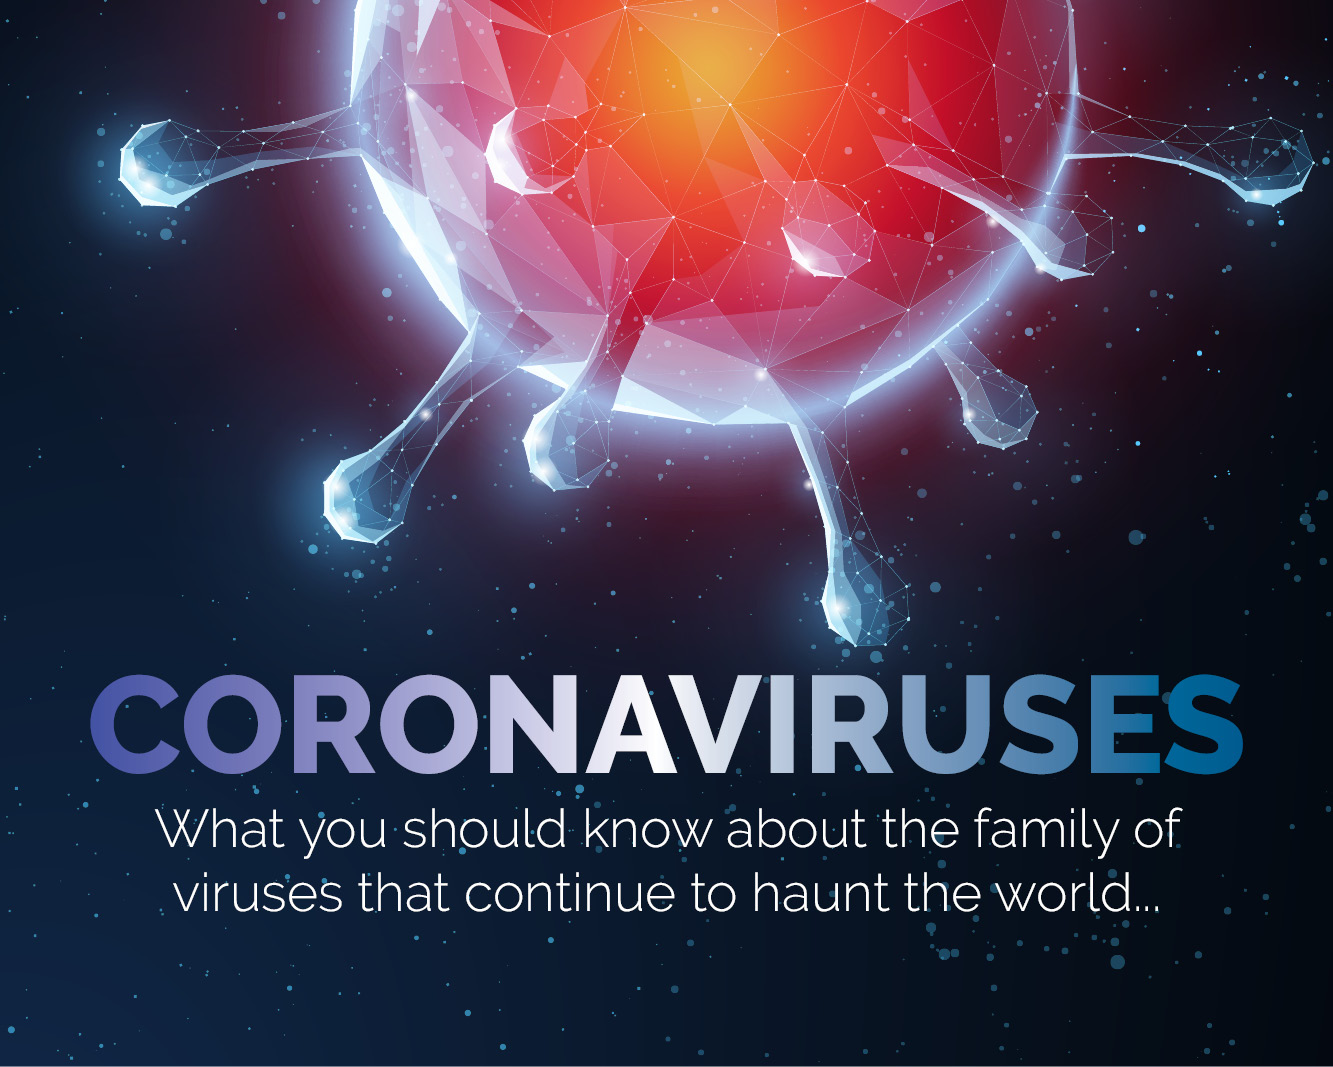 How to stay safe from the Coronavirus